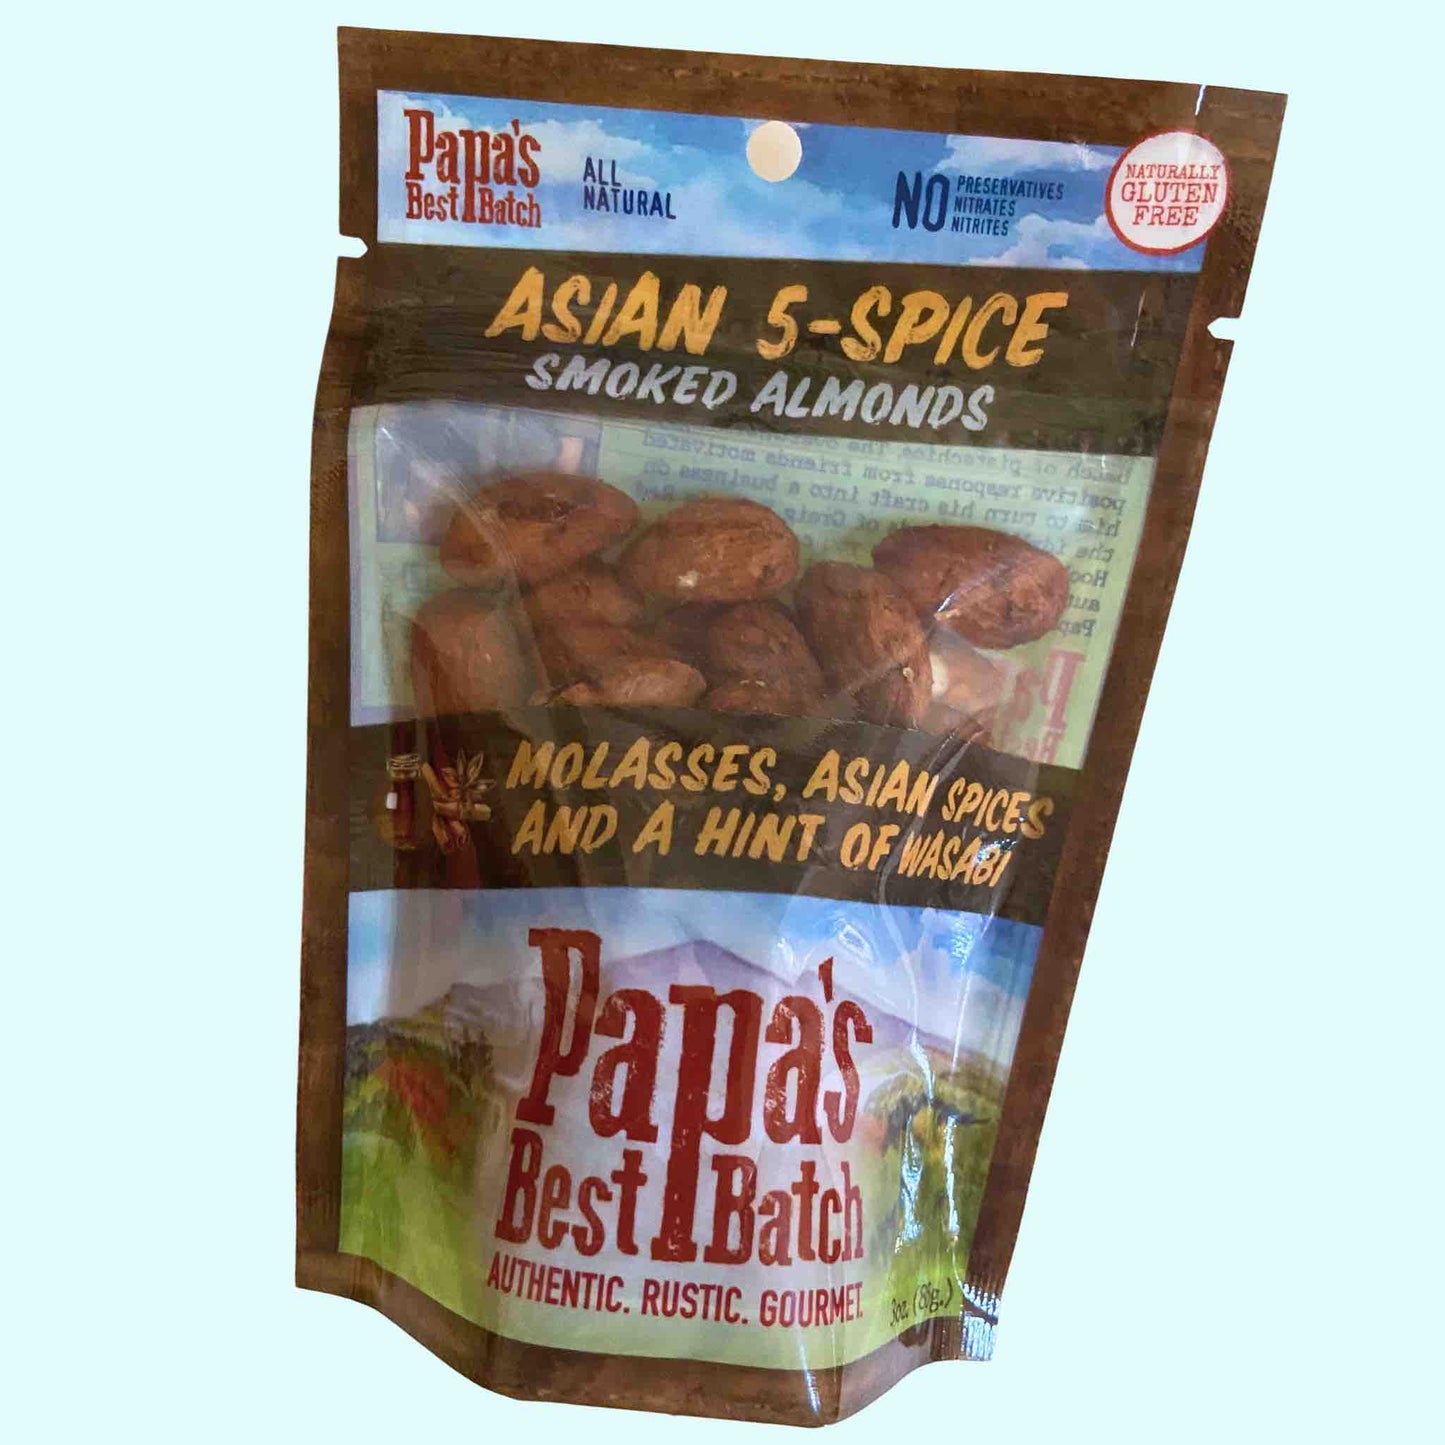 Asian Five-Spice Smoked Almonds